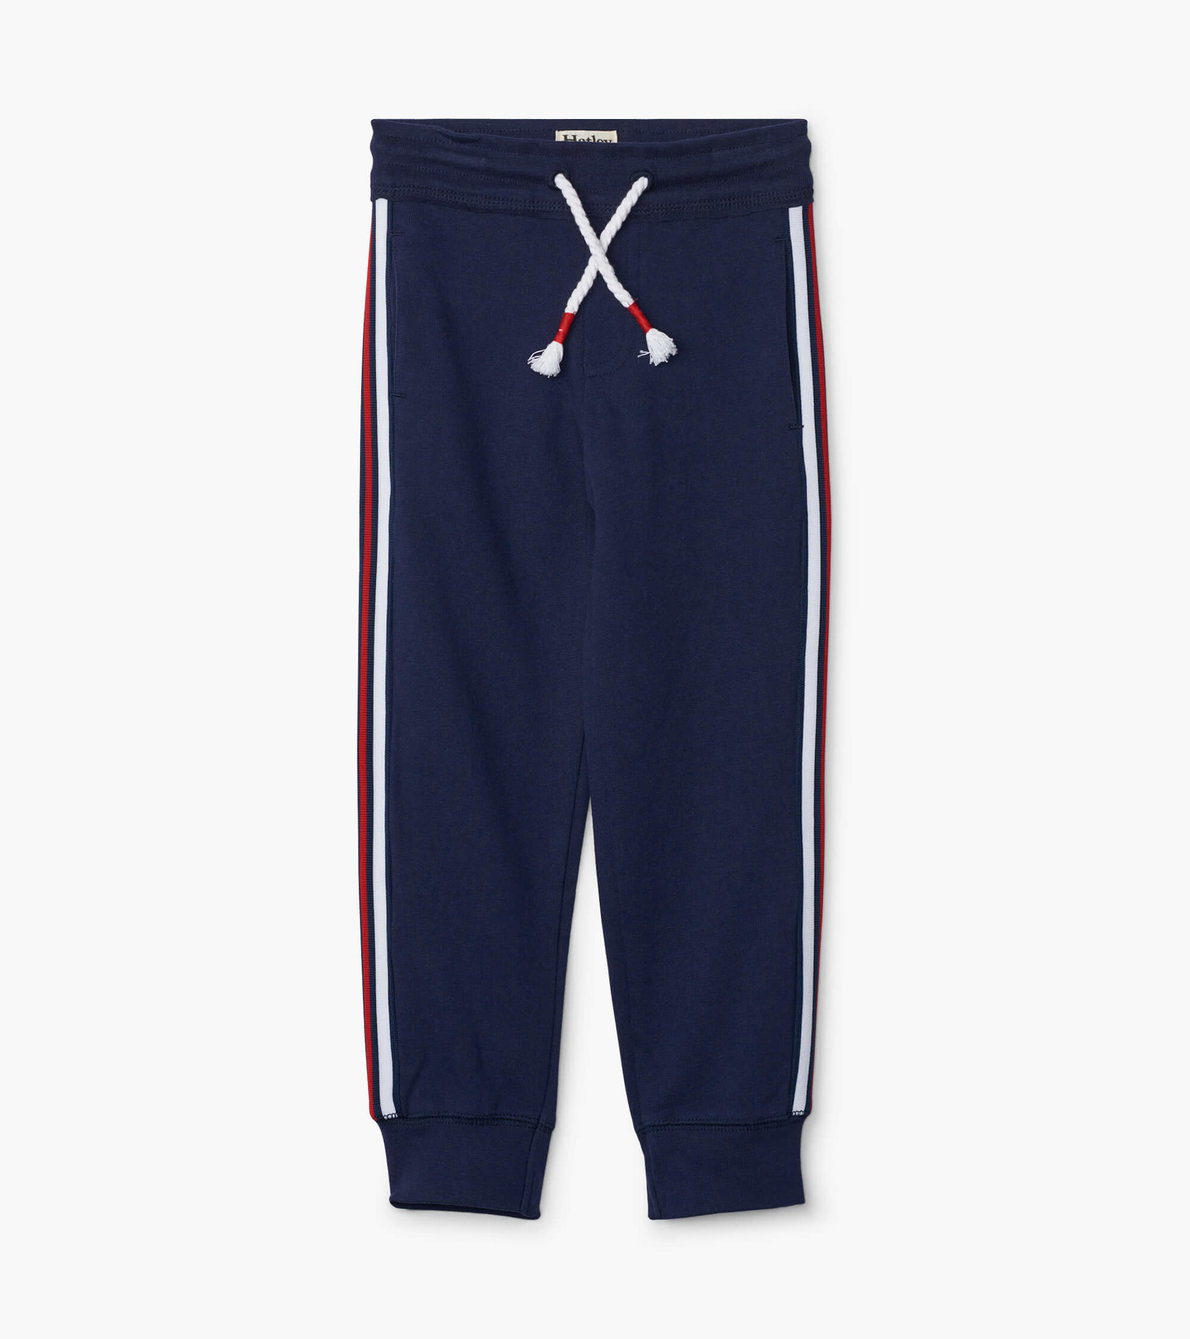 View larger image of Navy Side Stripe Joggers